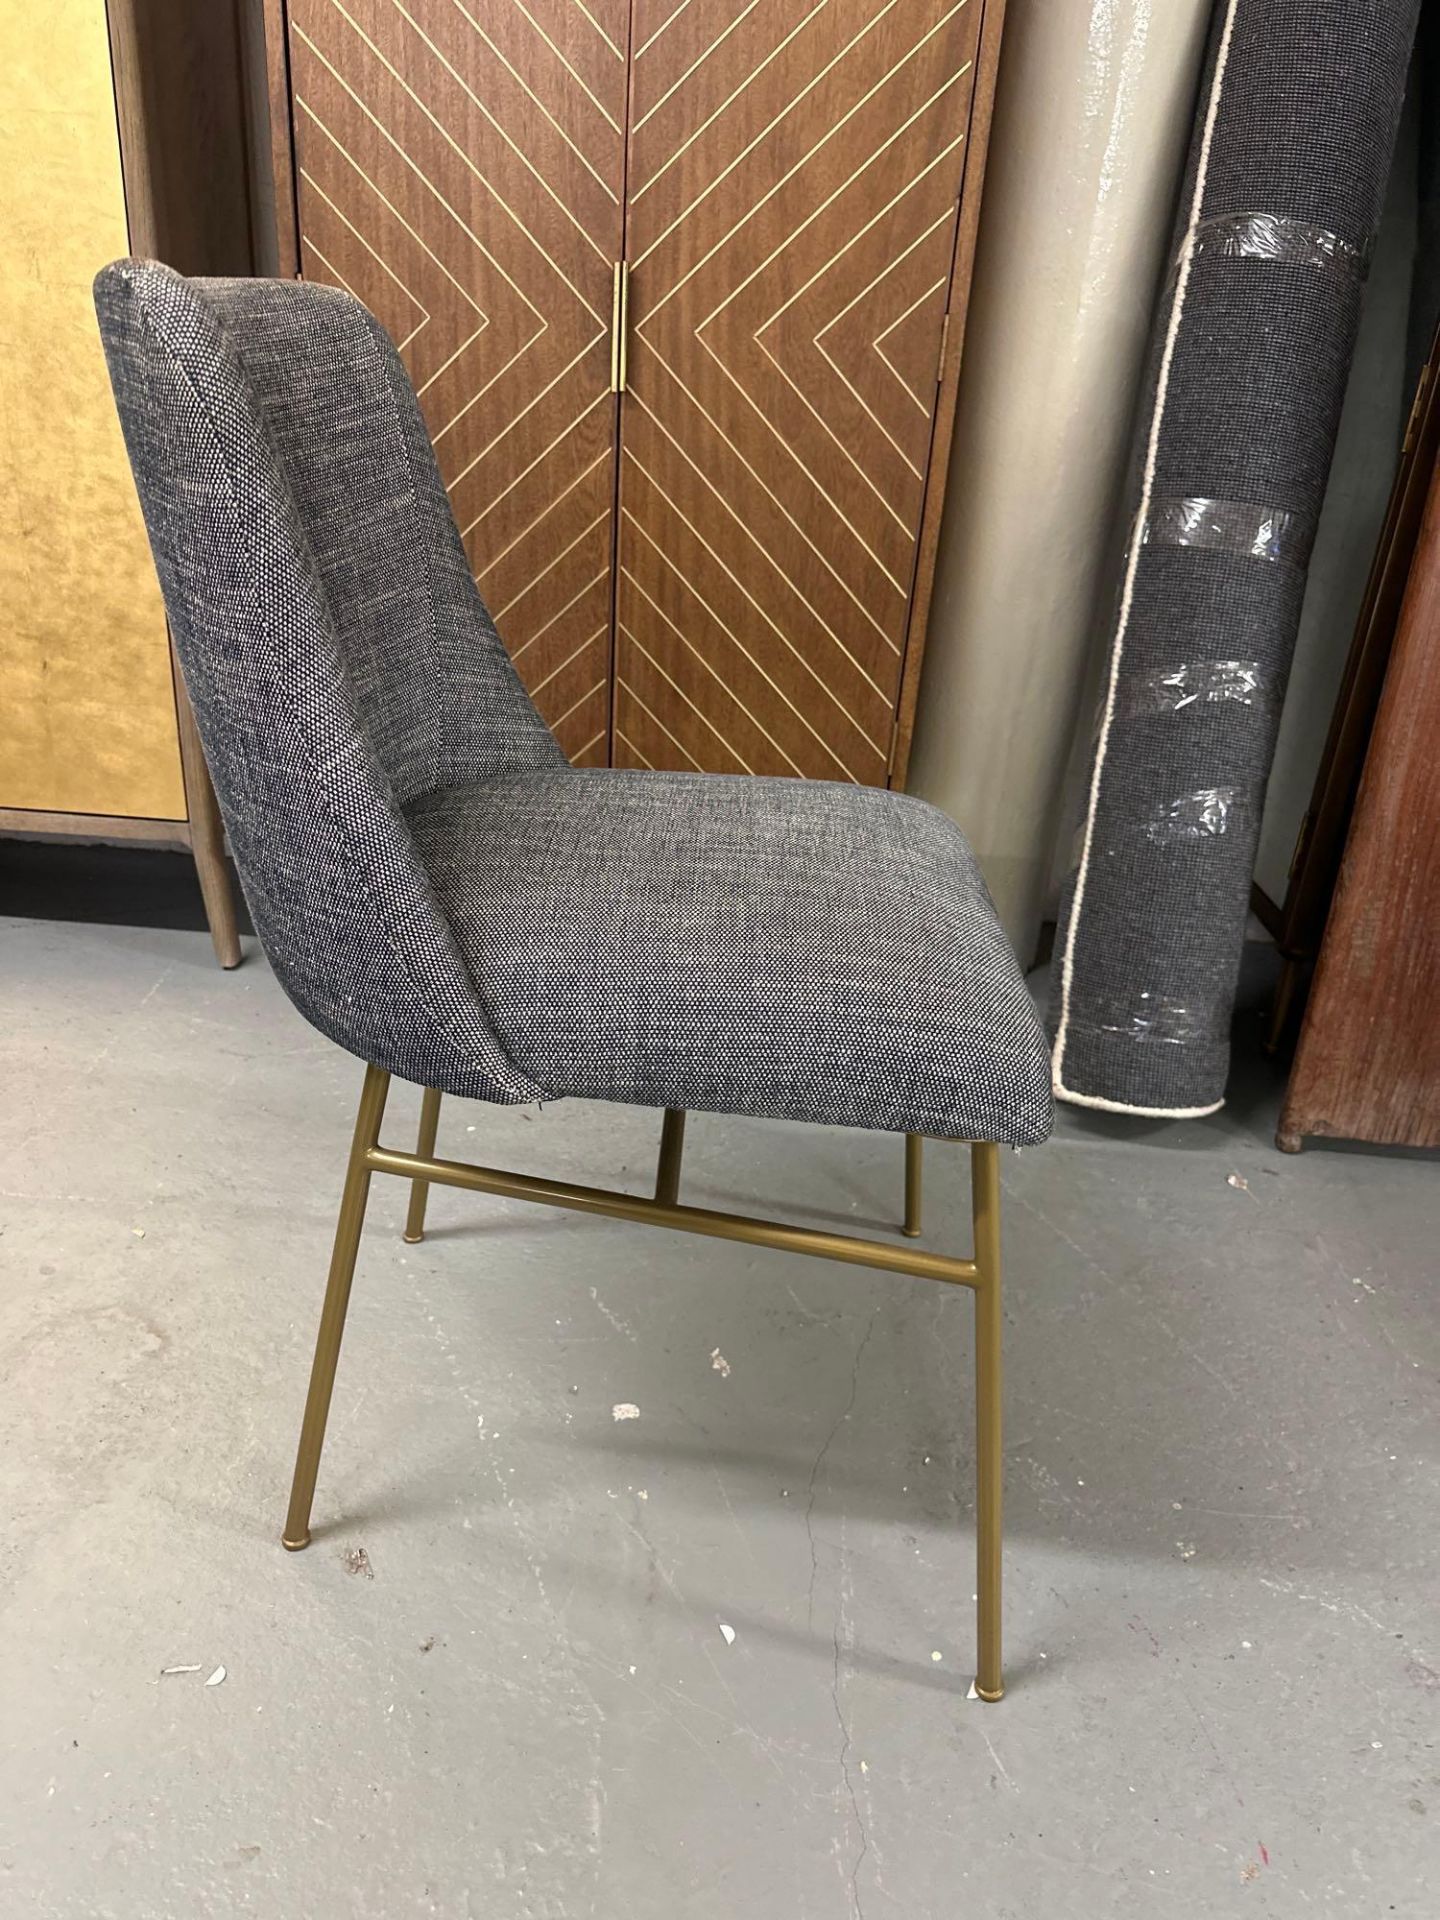 A set of contemporary dining chairs with gold finish effect legs and linen upholstery will add a - Image 3 of 3